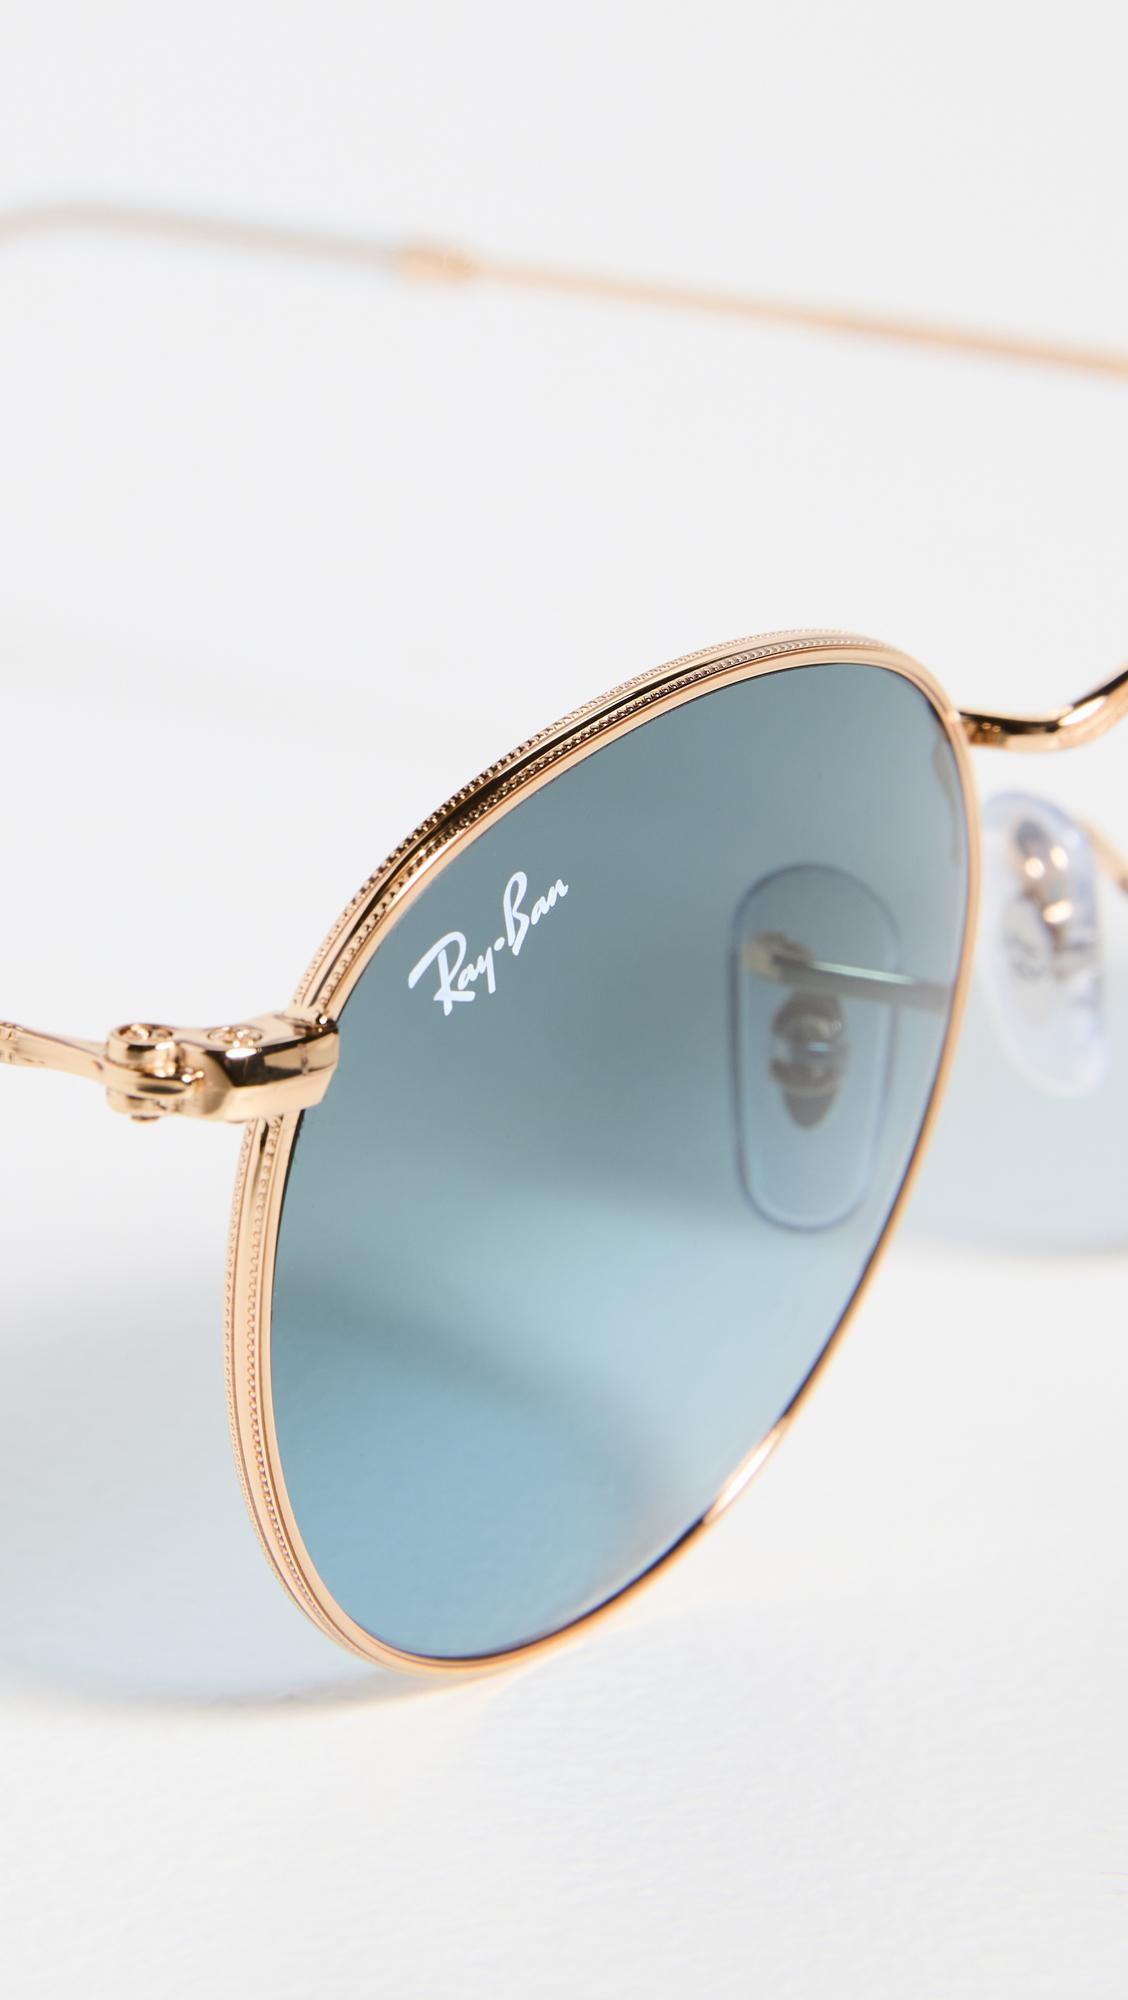 Ray-Ban 0rb3447 Round Metal Sunglasses in Blue | Lyst